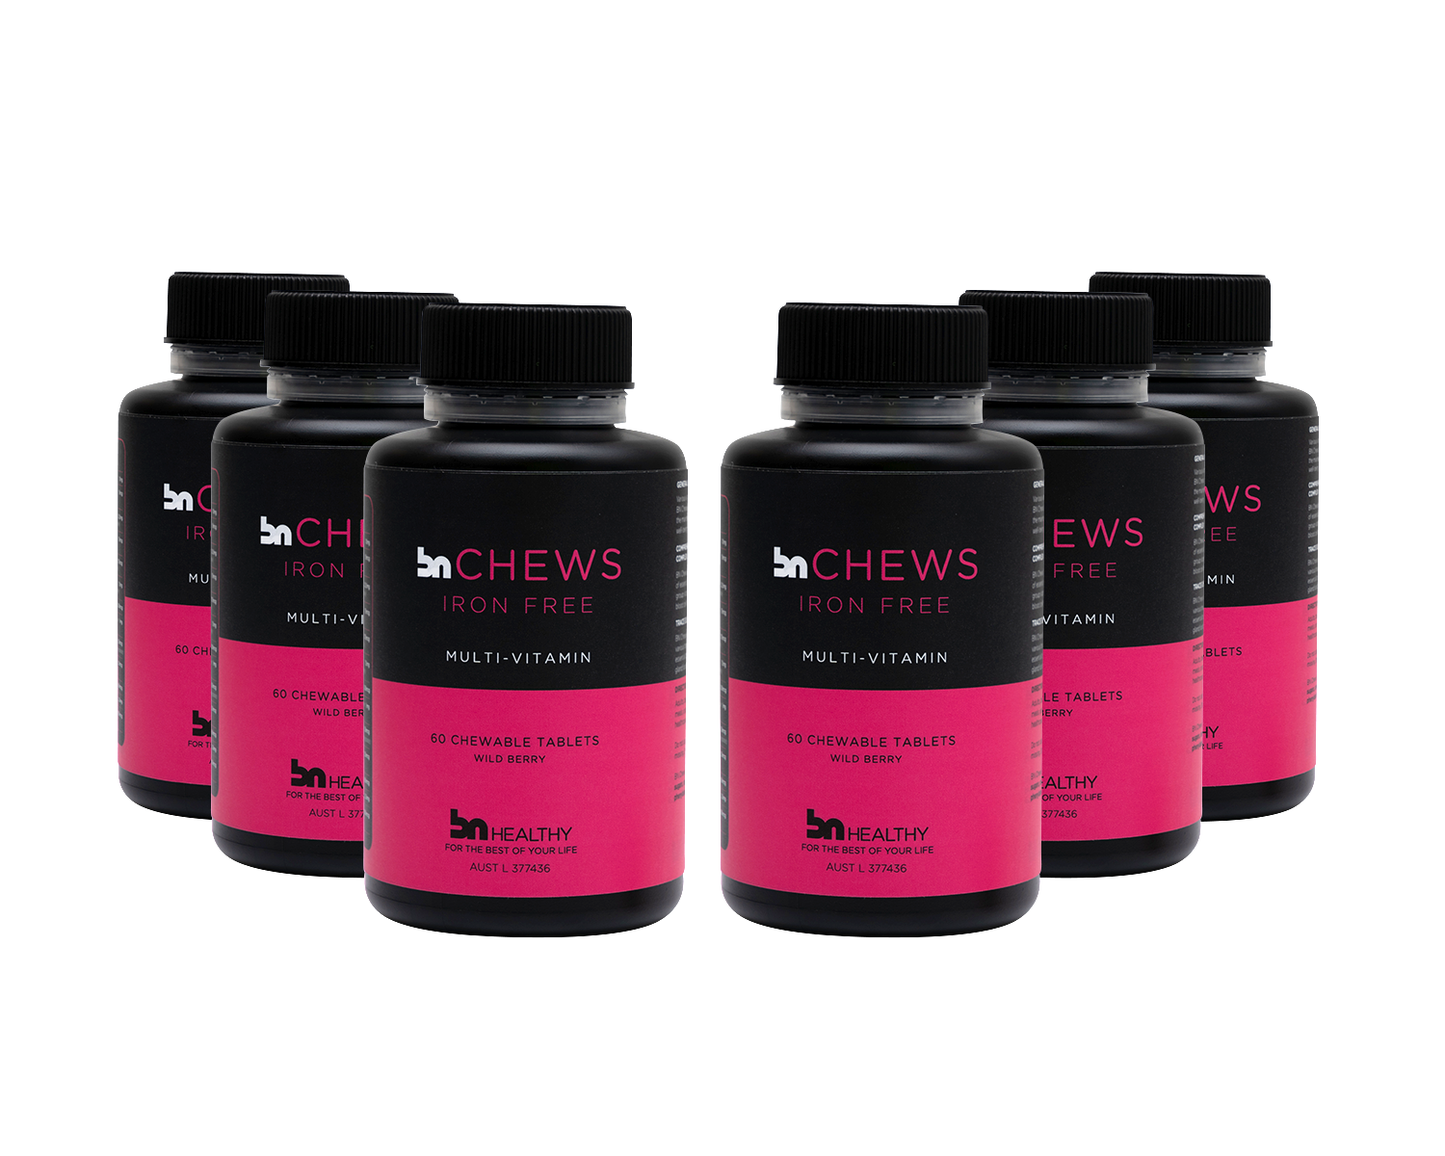 BN Chews Iron-Free - Chewable Multivitamins - 6 Month Subscription - Save 25%